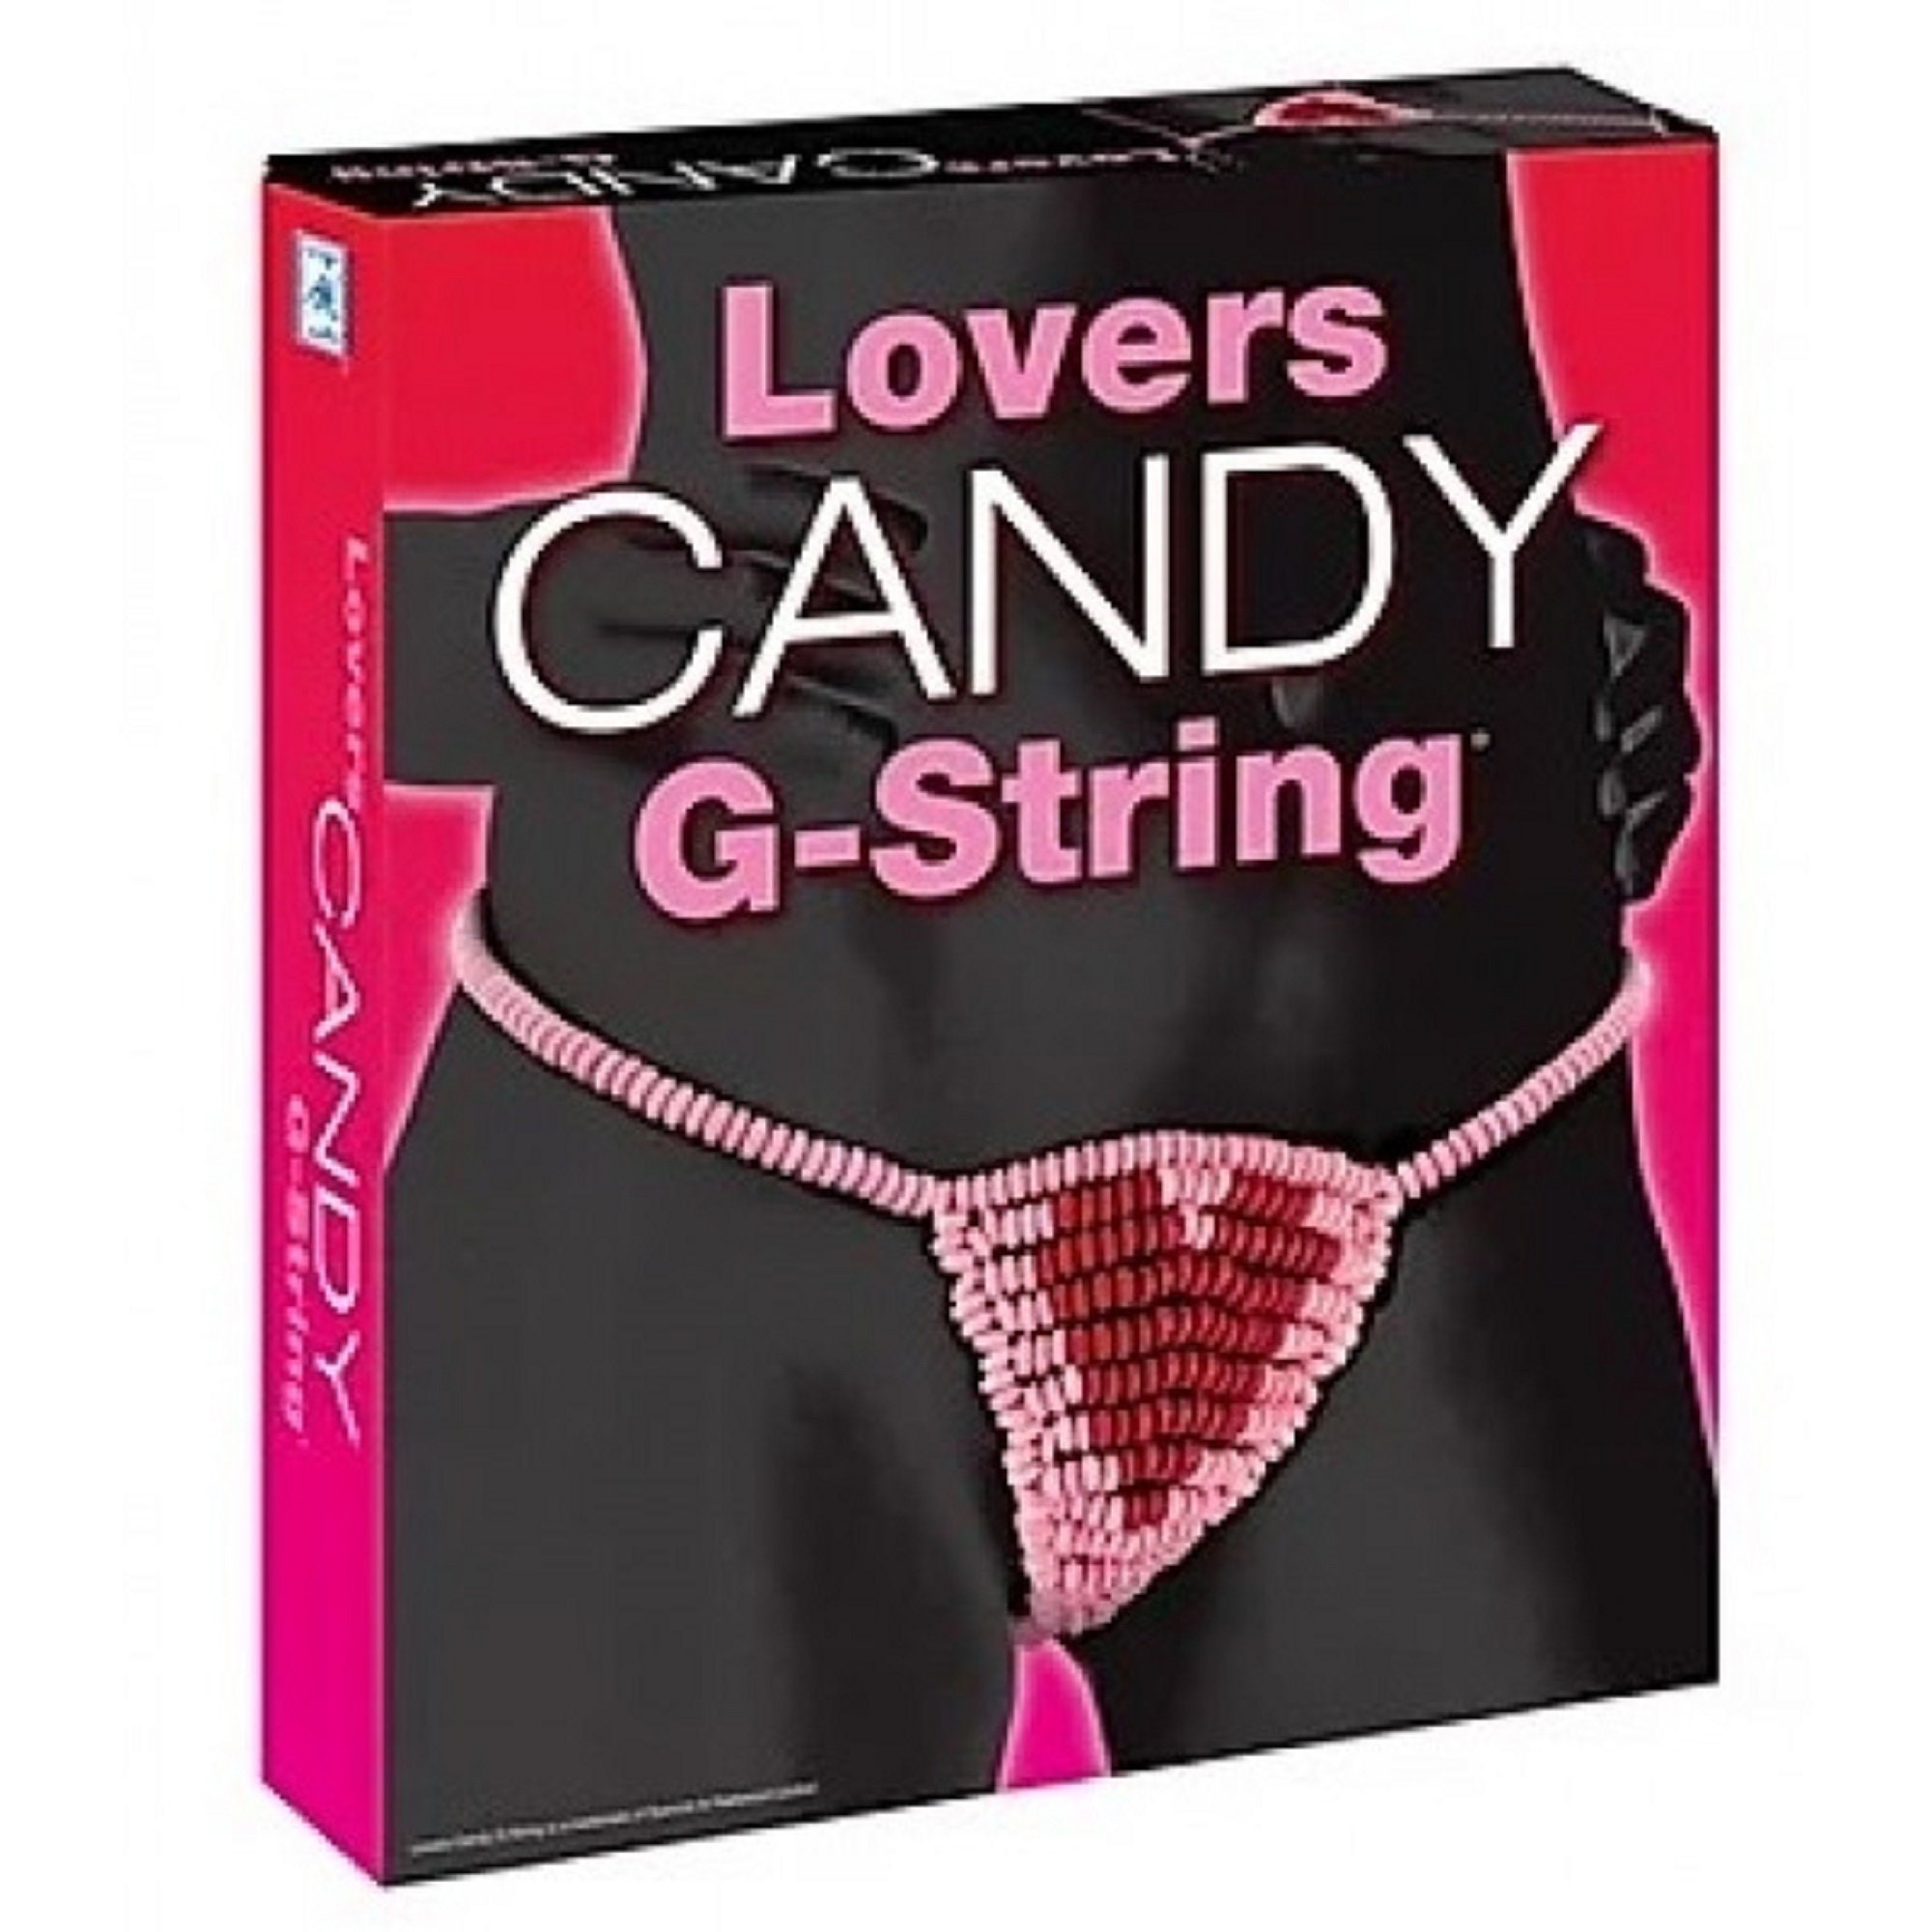 Candy Bra Sweet and Sexy Edible Underwear in Sealed Box UK SELLER